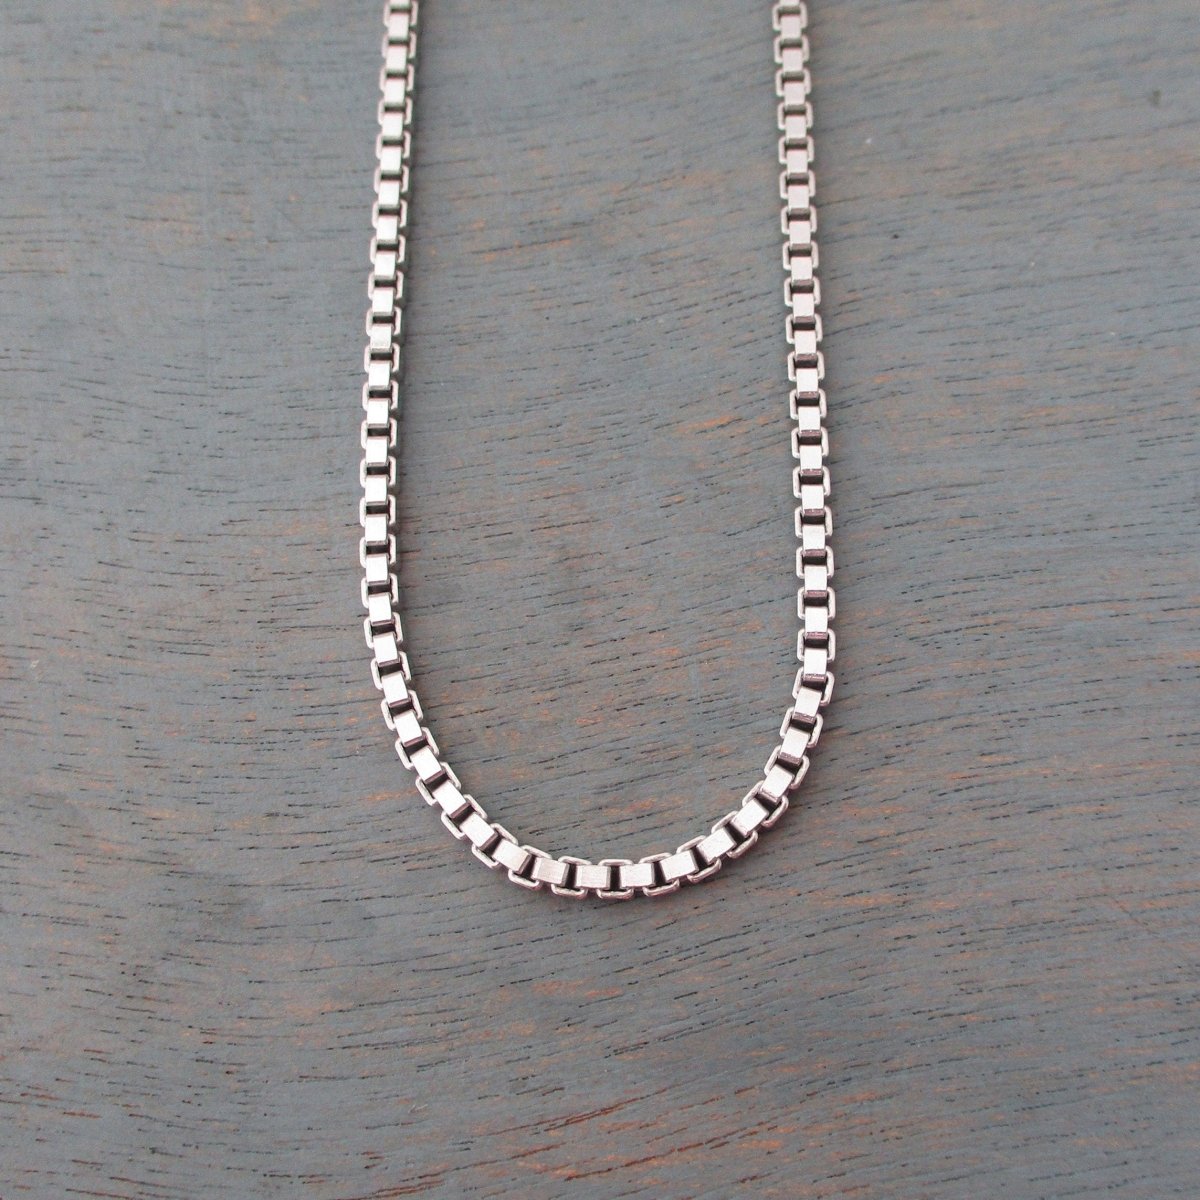 Sterling Silver Oxidized or Shiny 2.5mm Box Chain Bracelet - Luxe Design Jewellery